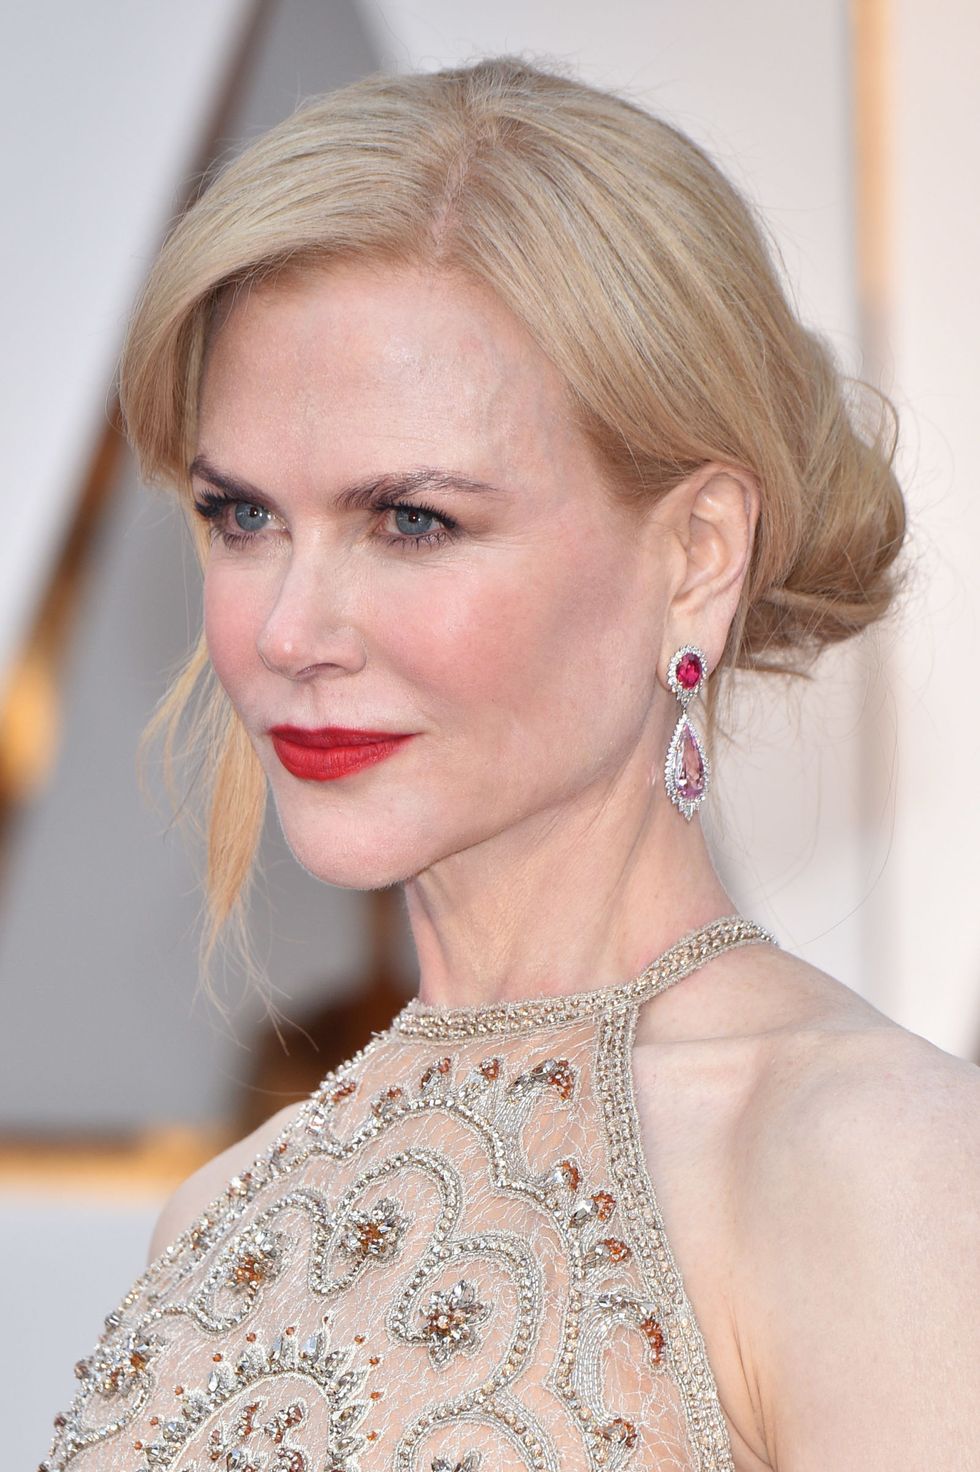 HOLLYWOOD, CA - FEBRUARY 26:  Actor Nicole Kidman attends the 89th Annual Academy Awards at Hollywood &amp; Highland Center on February 26, 2017 in Hollywood, California.  (Photo by Kevin Mazur/Getty Images)